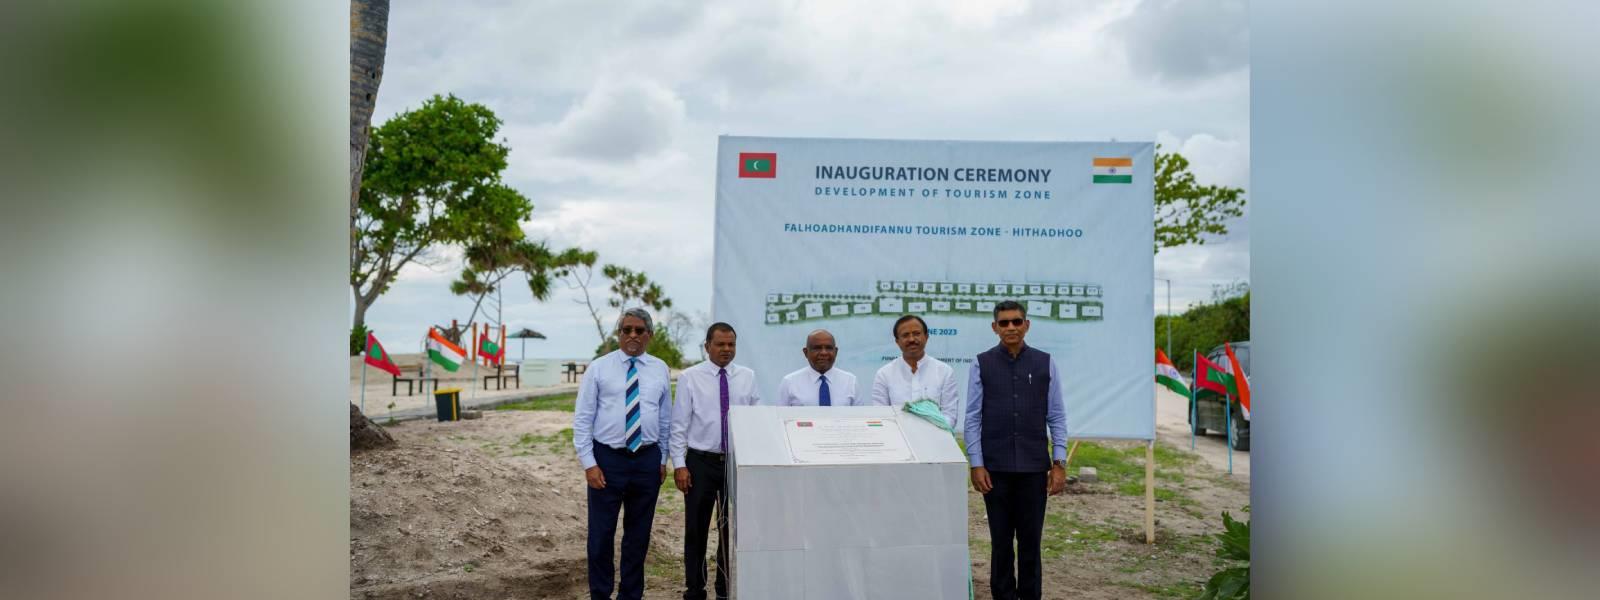 Minister of State for External Affairs Shri V. Muraleedharan inaugurated Hithadhoo eco-tourism zone in Addu City with Foreign  Minister of Maldives, H.E. Mr. Abdulla Shahid & Mayor of Addu City H.E. Mr. Ali Nizar